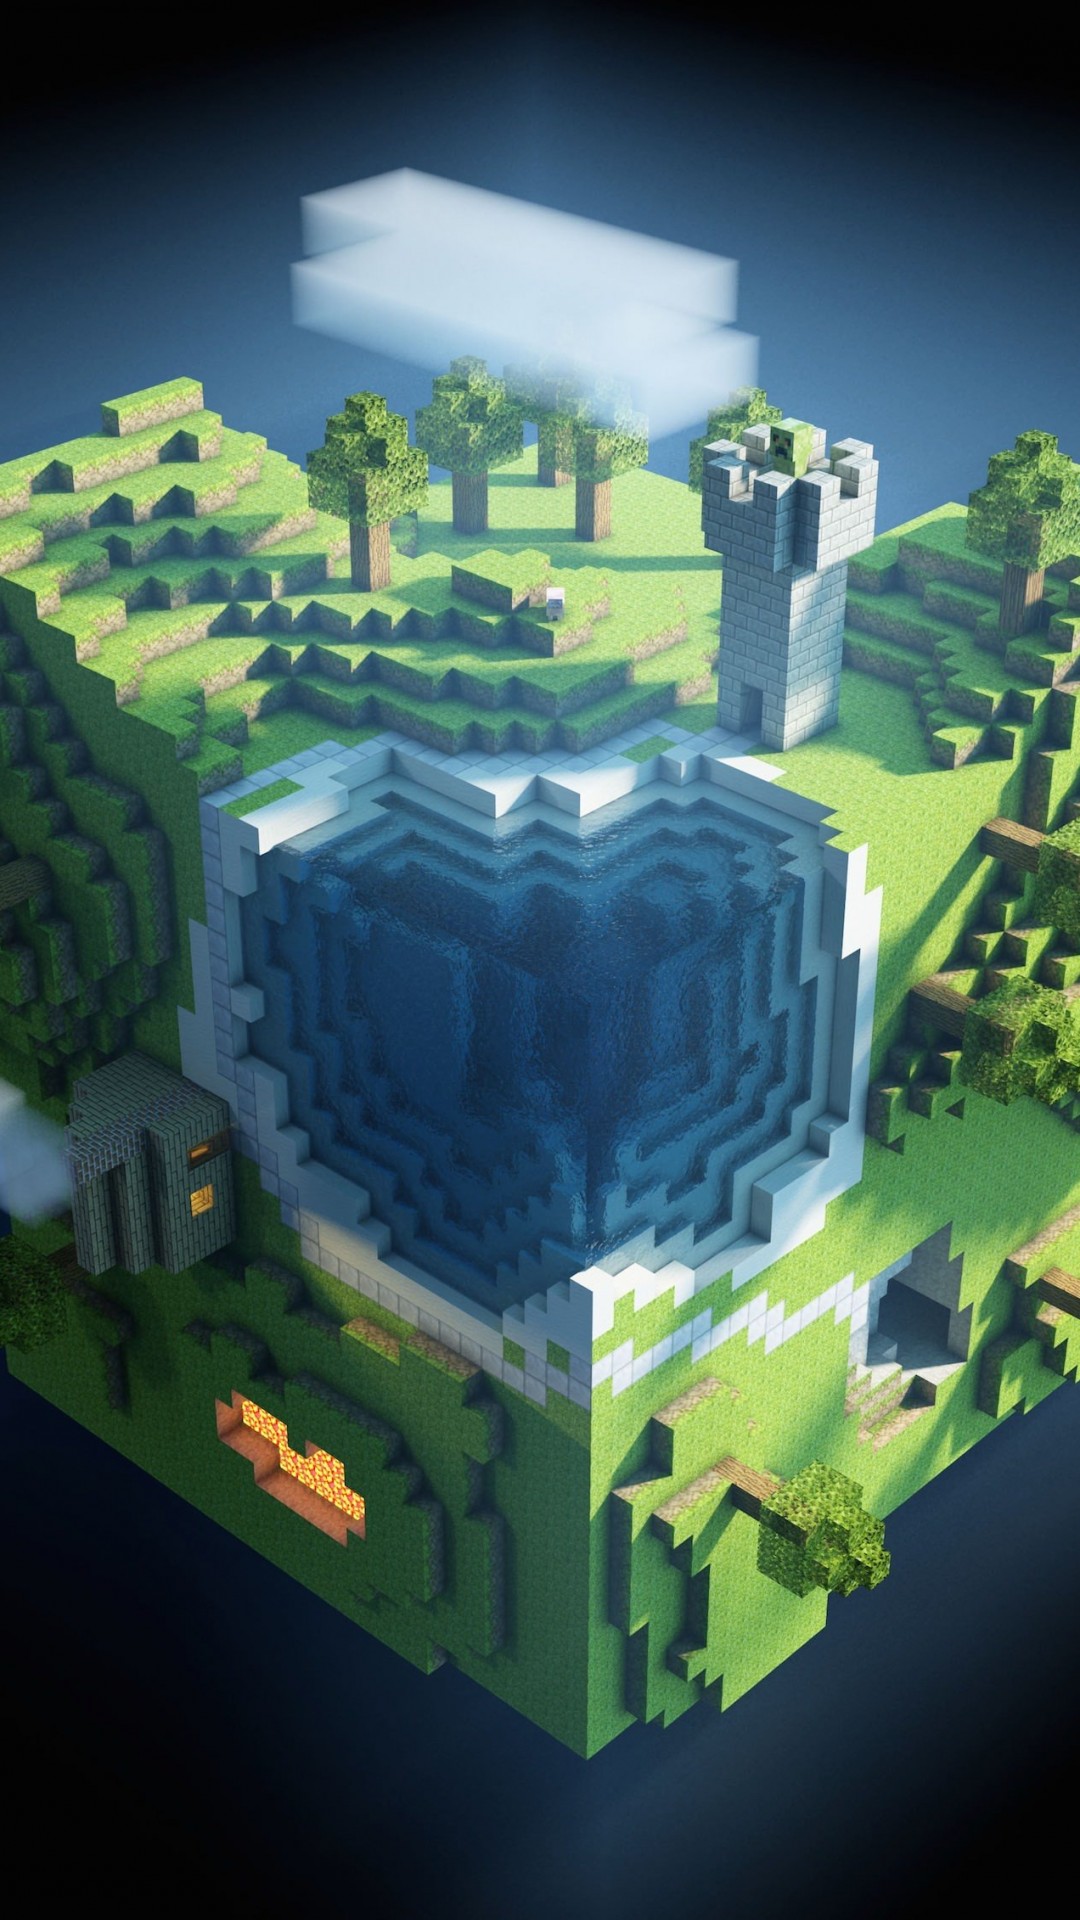 Planet Minecraft Wallpaper for SAMSUNG Galaxy Note 3